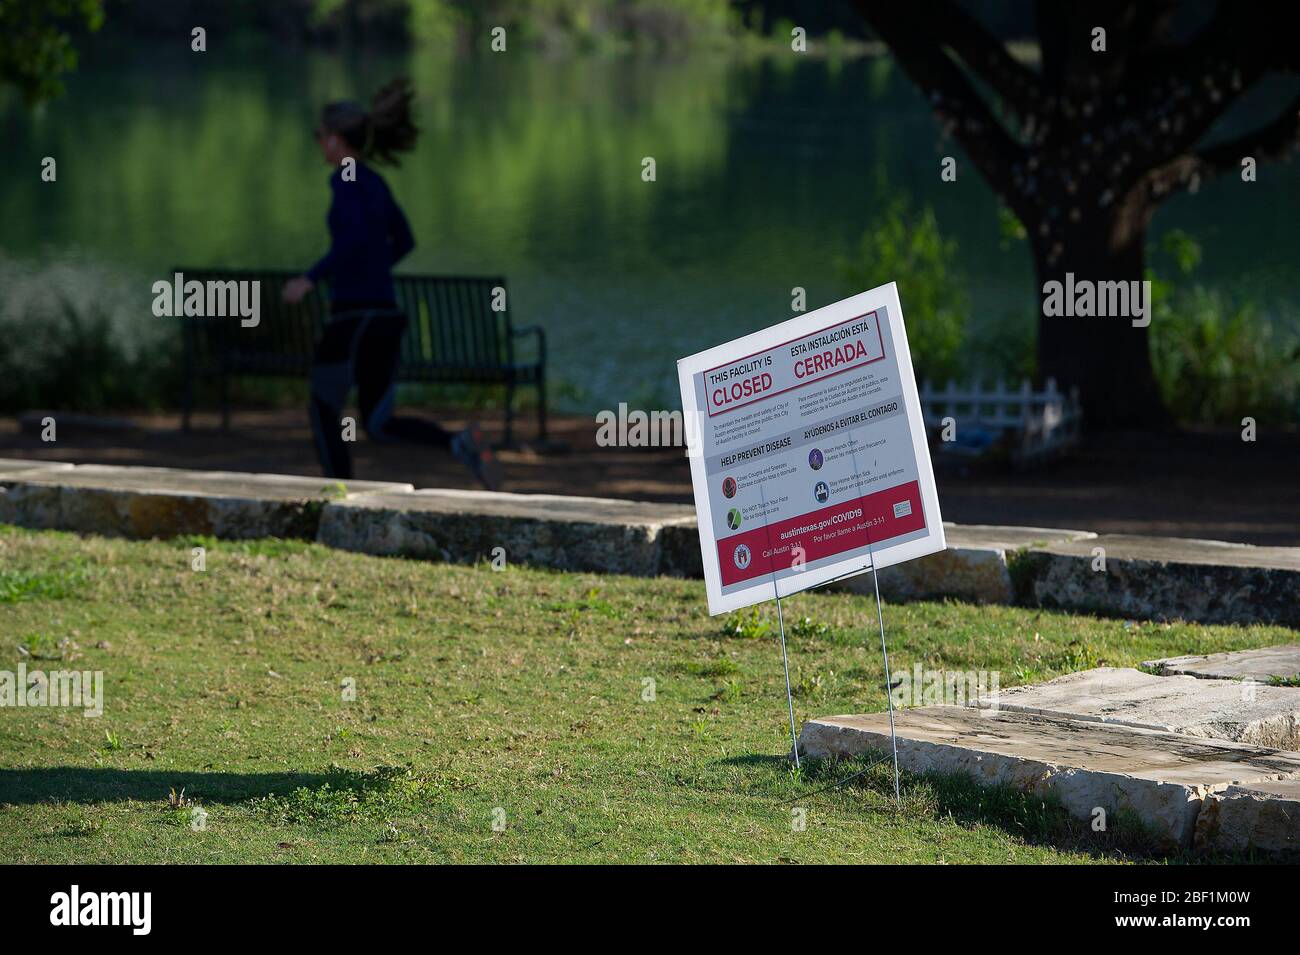 April 16, 2020: The City of Austin Parks Department issued signs that state 'This facility is CLOSED''. To maintain the health and safety of City of Austin employees and the public the City of Austin facility is closed. Austin, Texas. Mario Cantu/CSM Stock Photo